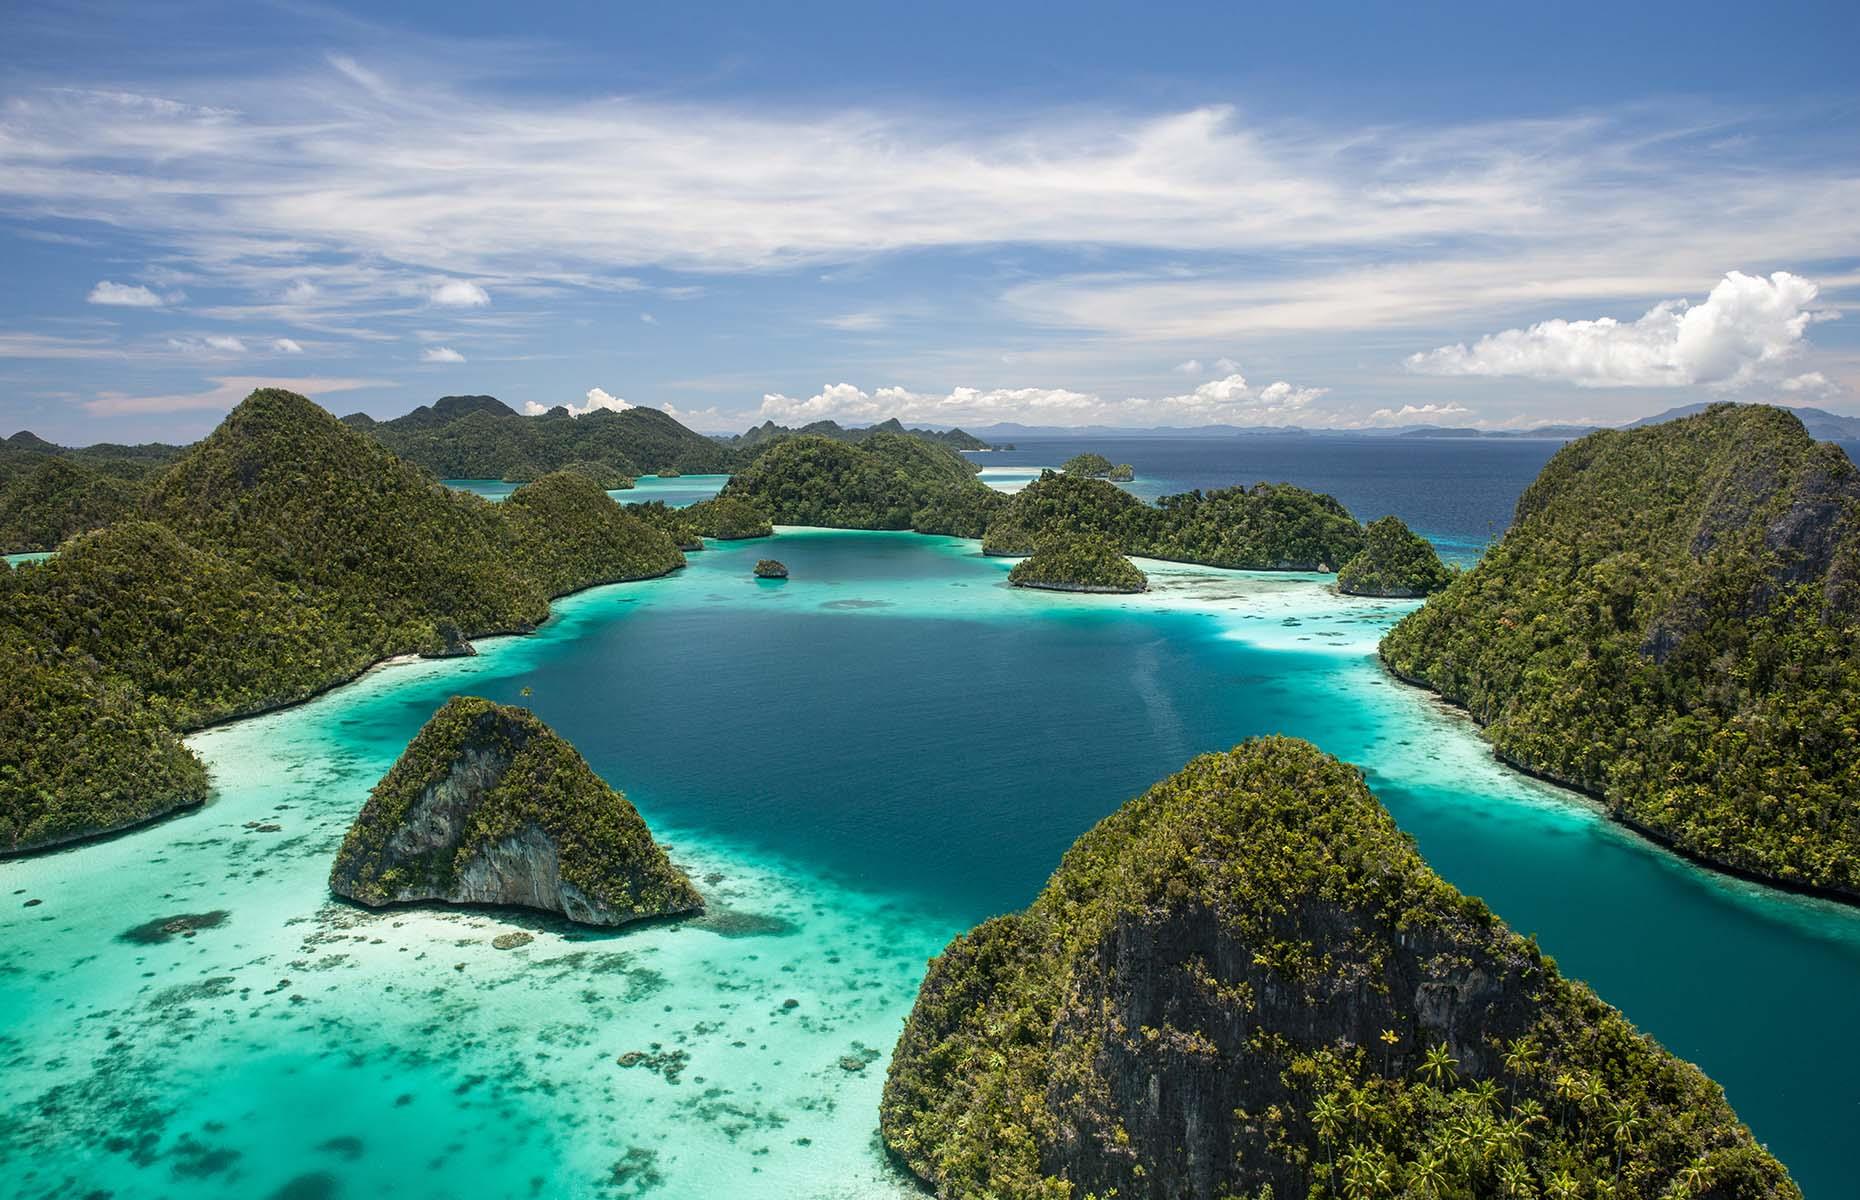 <p>Don’t be surprised if Raja Ampat looks familiar – it was recently the focus of <em>Wilderness</em>, a BBC TV show in which explorer Simon Reeve visits the world’s most beautiful places. An Indonesian archipelago comprising more than 1,500 islands, it’s one of the world’s most biodiverse regions. Sailings are often on smaller yacht-style vessels and will include visits to islands such as Mios Kon Island, with its colonies of endangered green turtles; and Wayag Island, dominated by Mount Pindito.</p>